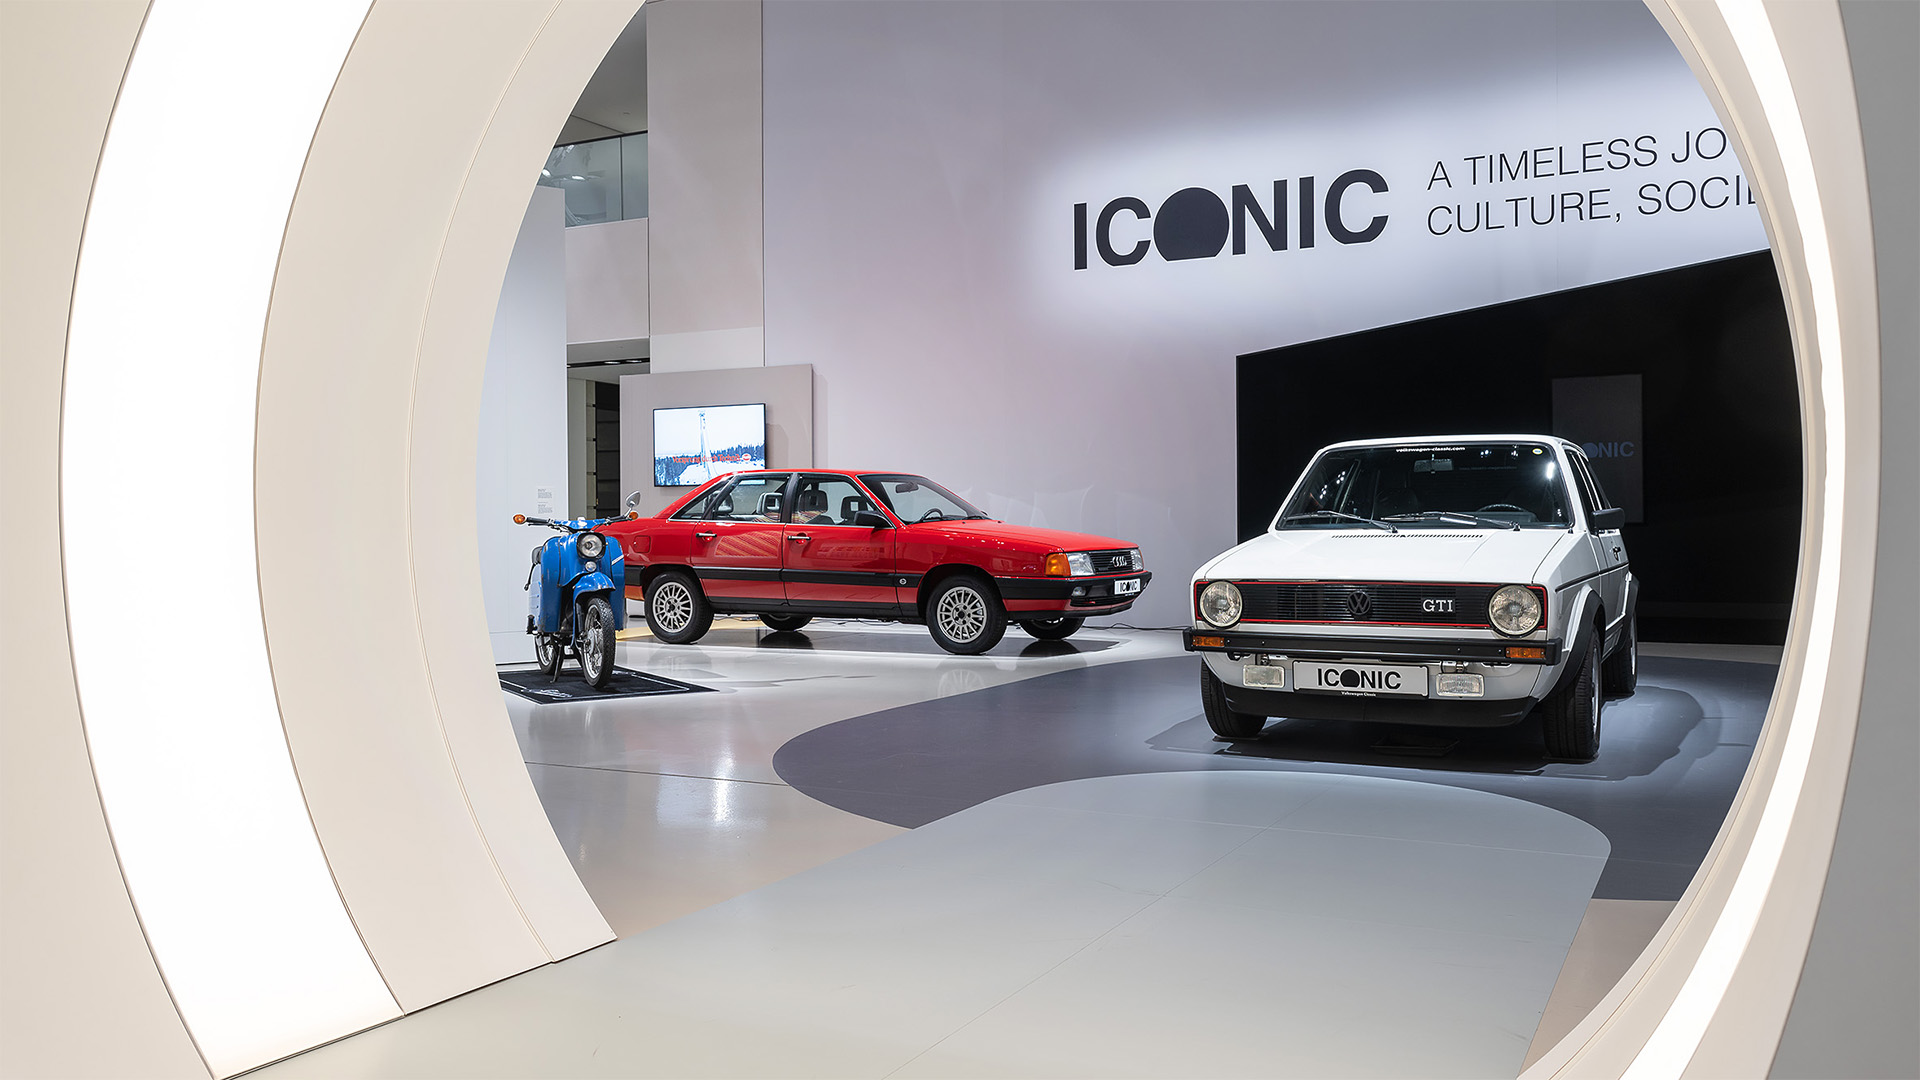 Iconic a timeless journey of culture, society and mobility